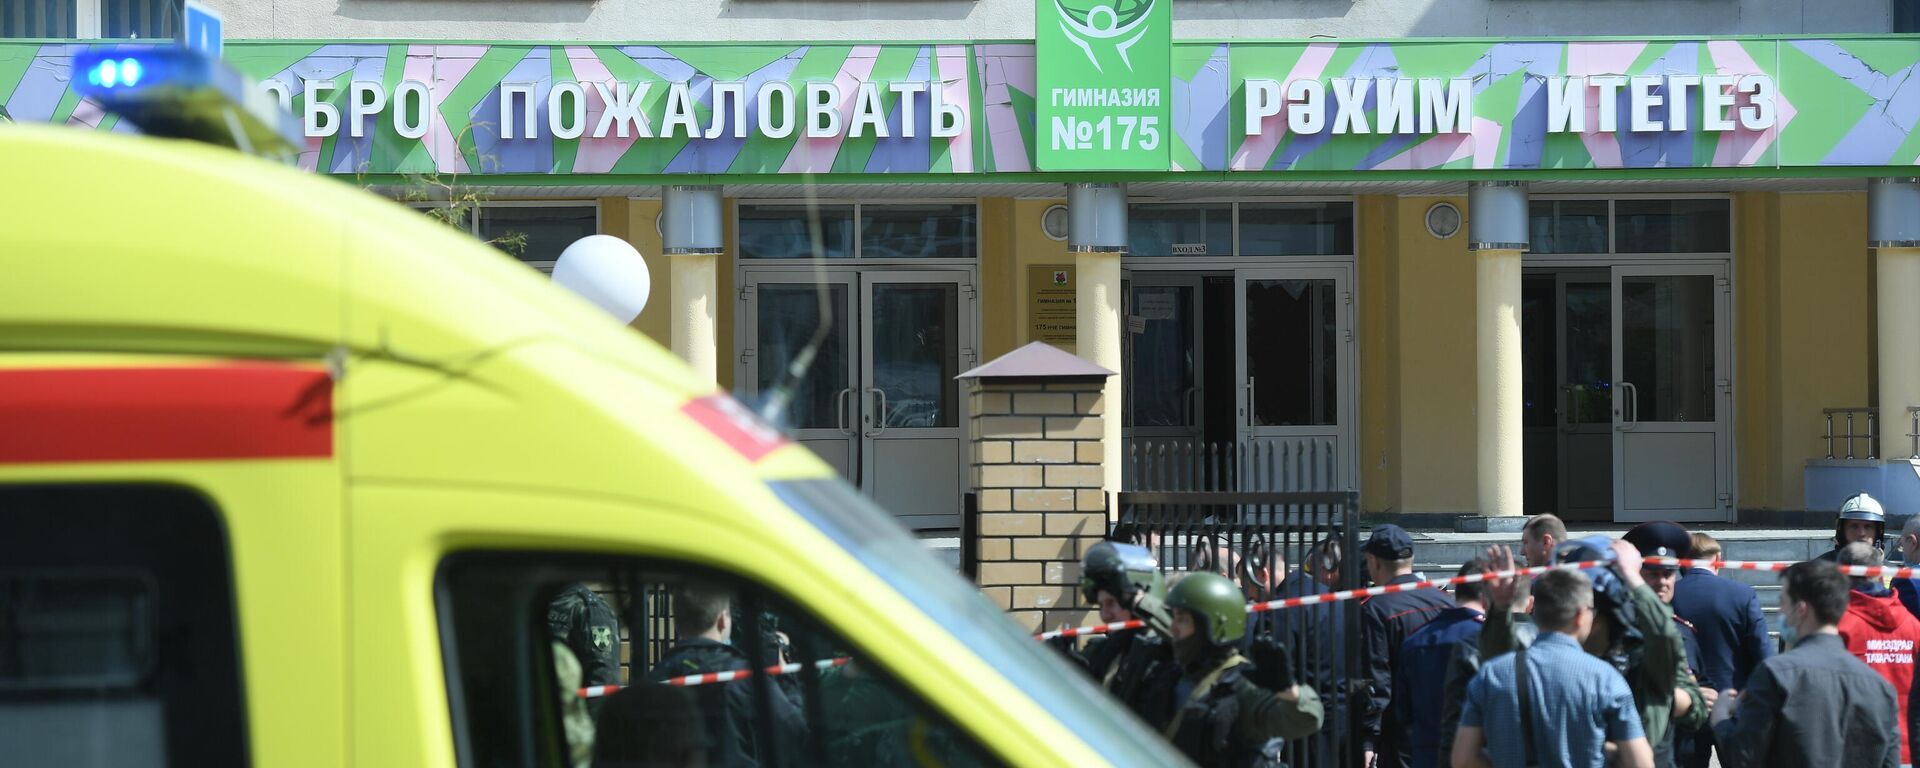 Police and paramedics work at the scene of a shooting at Gymnasium No. 175 in Kazan, Russia's Republic of Tatarstan. According to preliminary data, six schoolchildren and a teacher were killed. The suspected attacker, a 17-year-old male, was detained earlier in the day. - Sputnik Узбекистан, 1920, 11.05.2021